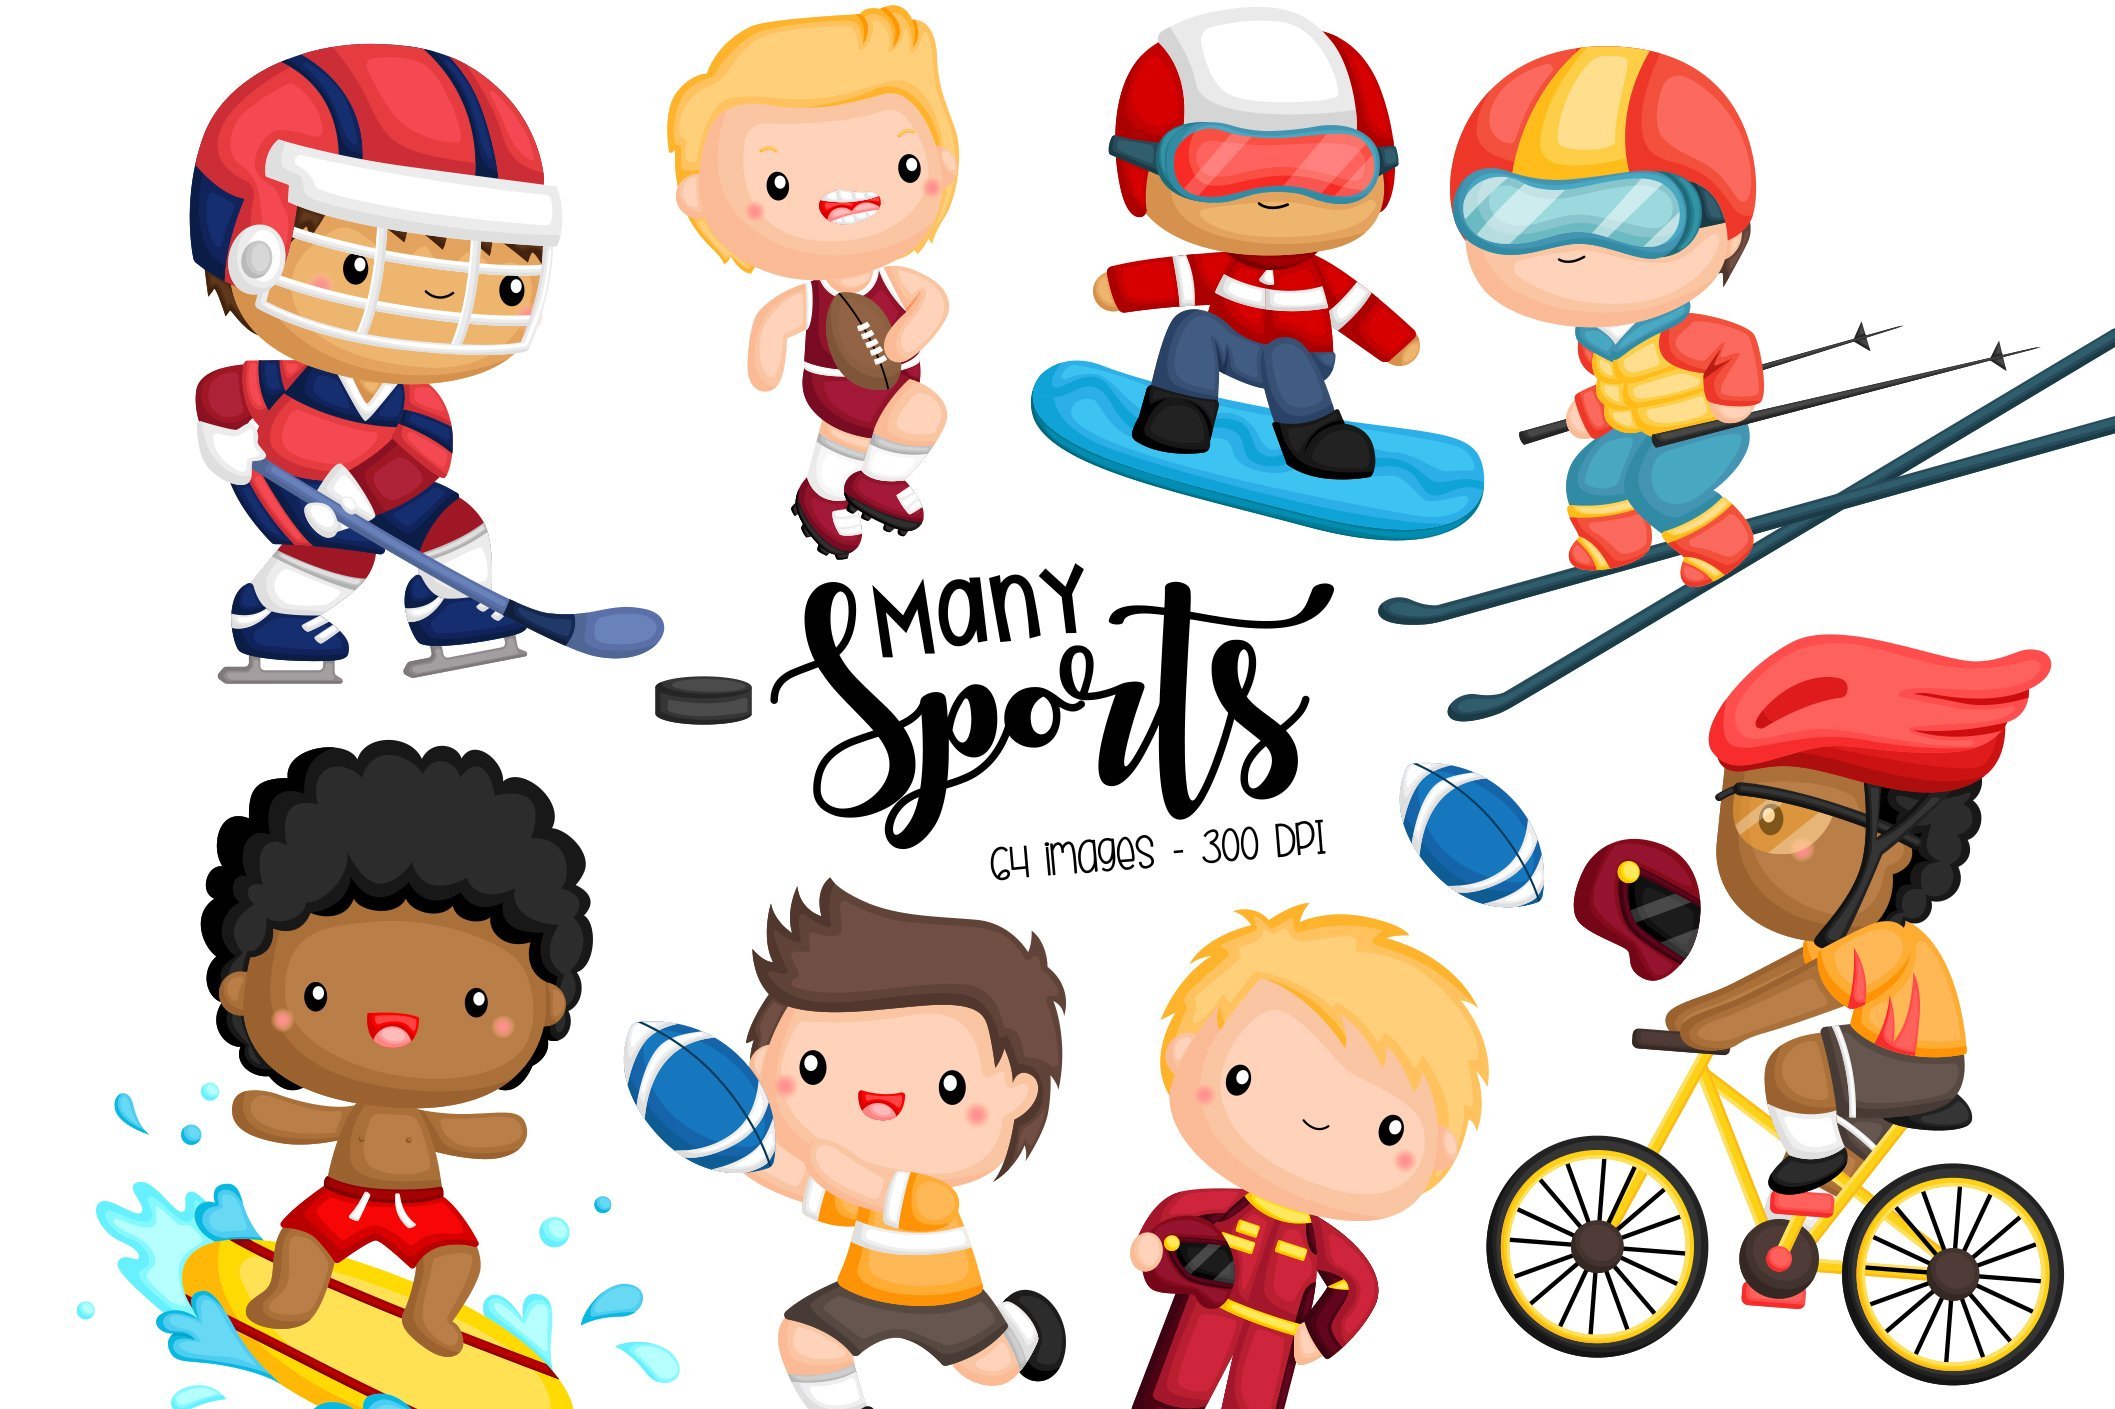 Sport and Boys Clipart - Cute Kids cover image.